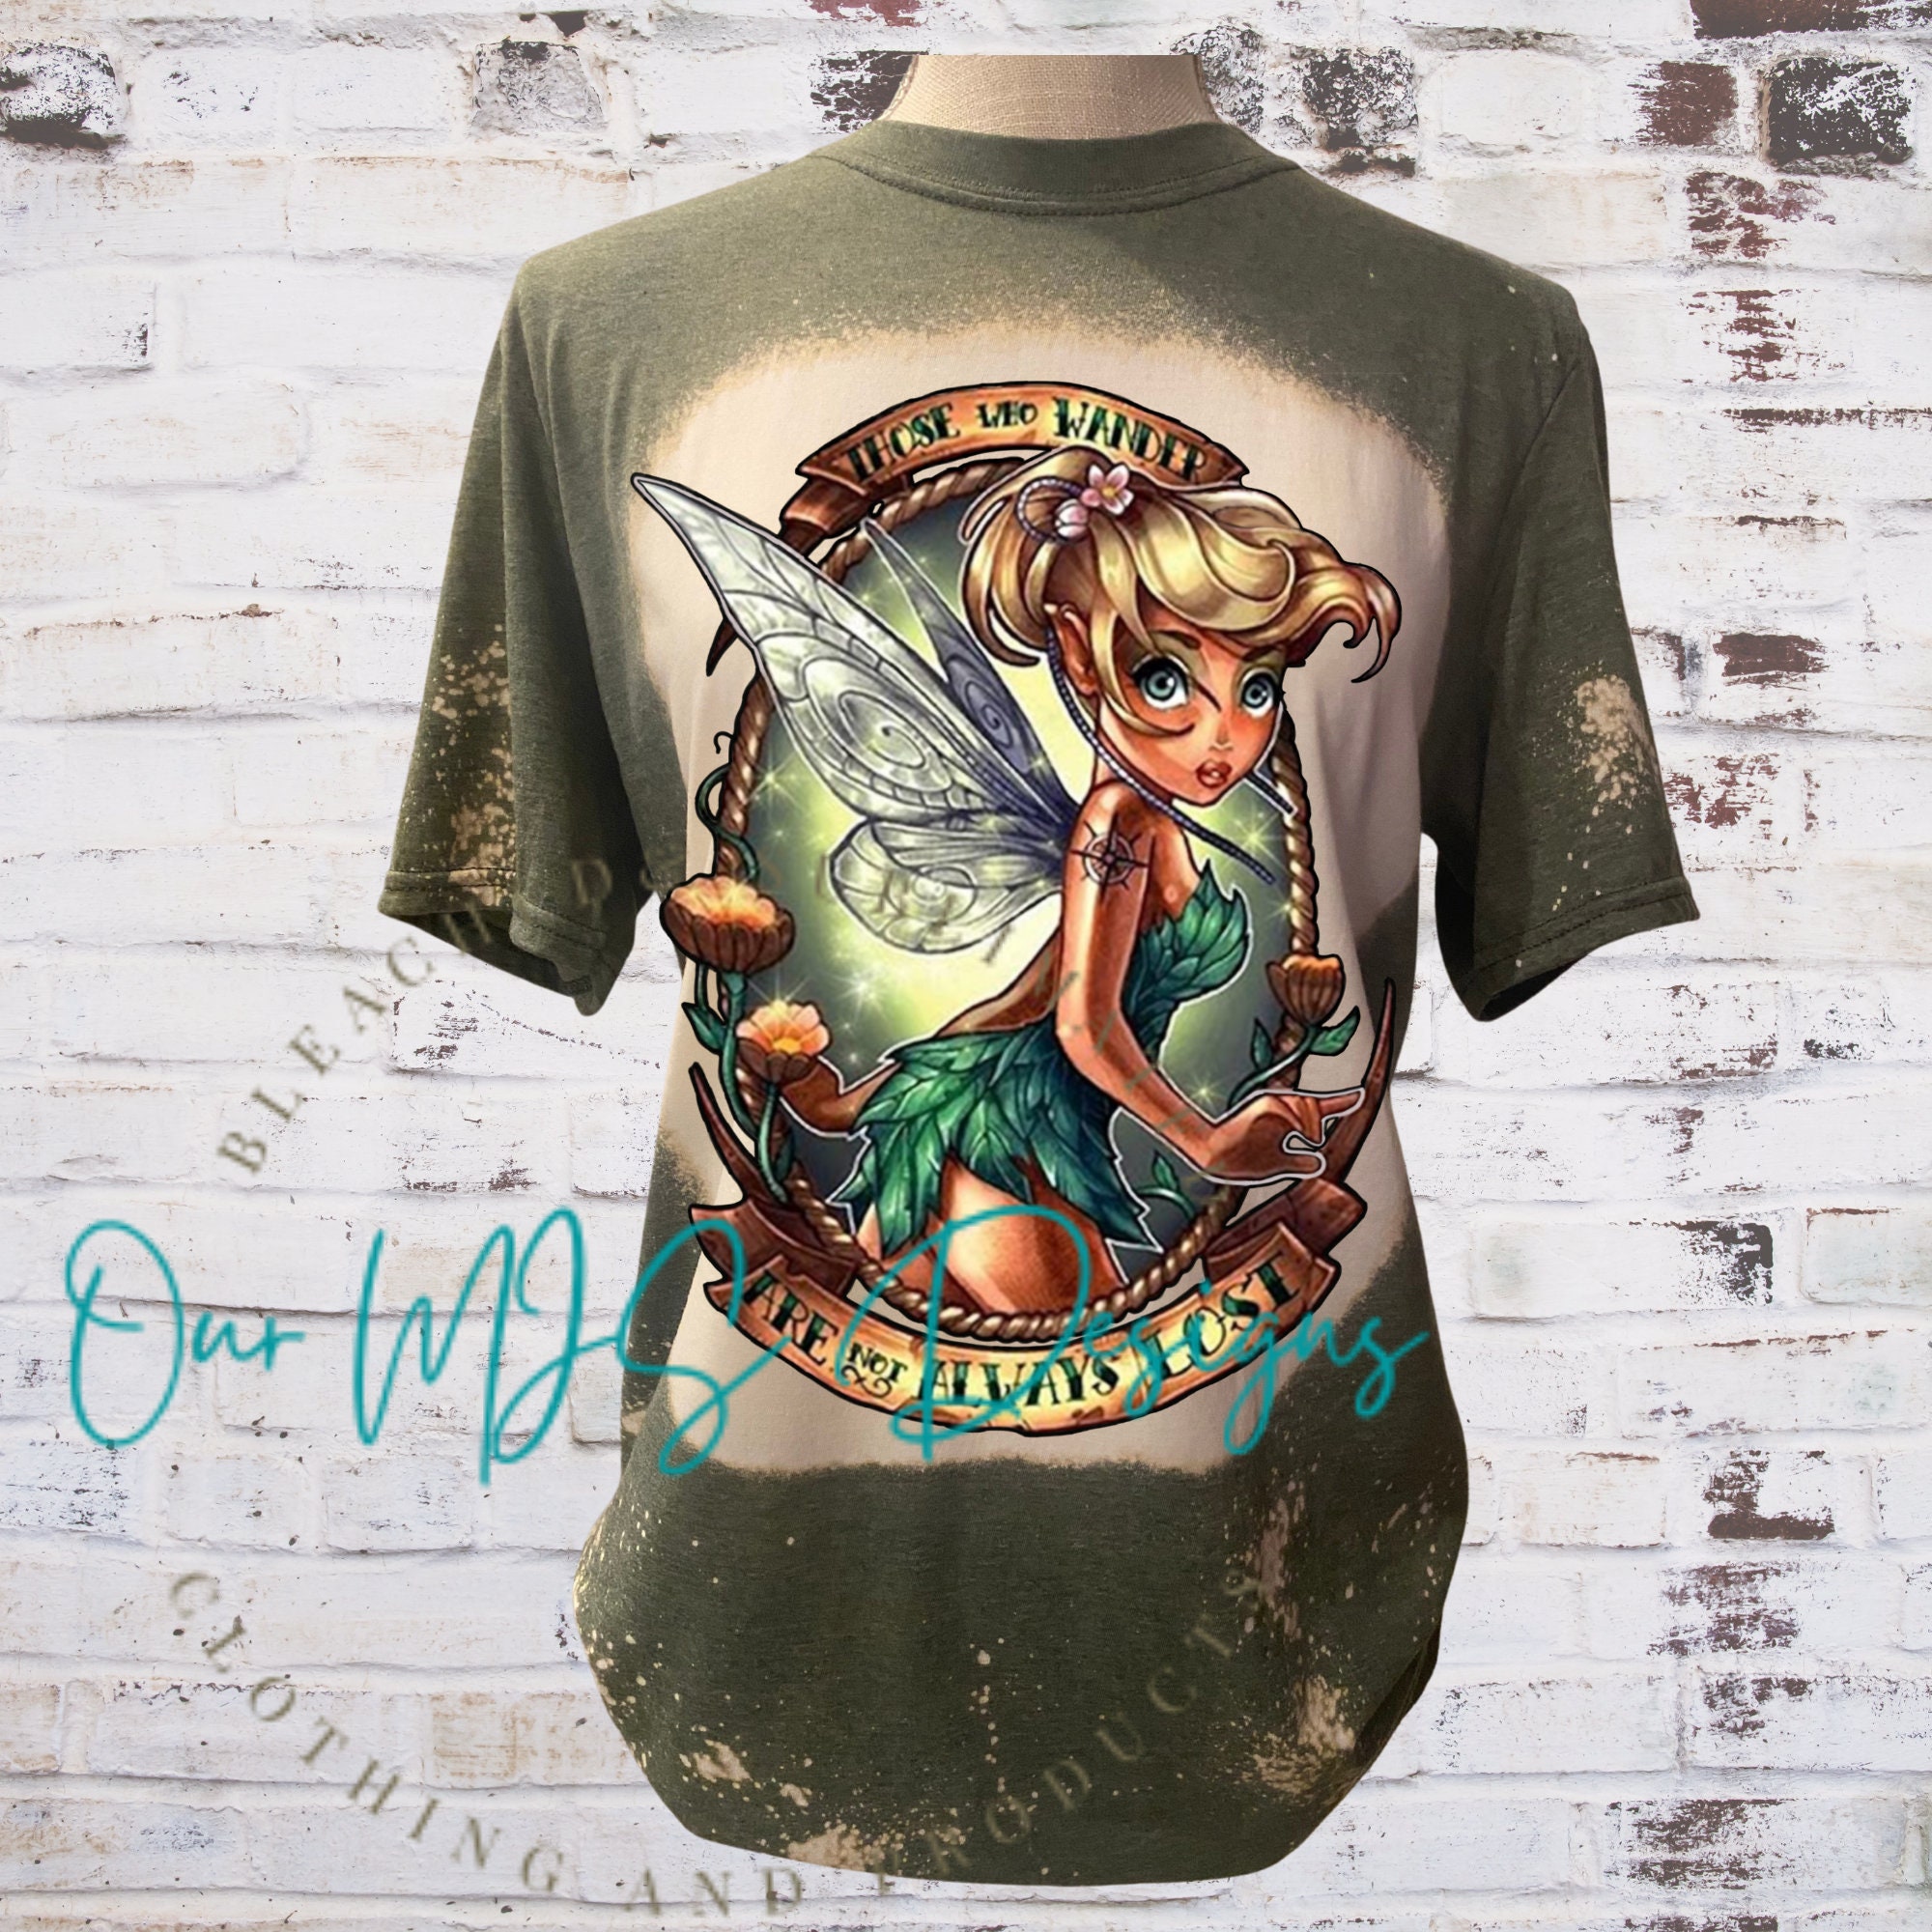 Discover Tinker Bell - Inspired- Those who wander are not always lost 3D Shirt